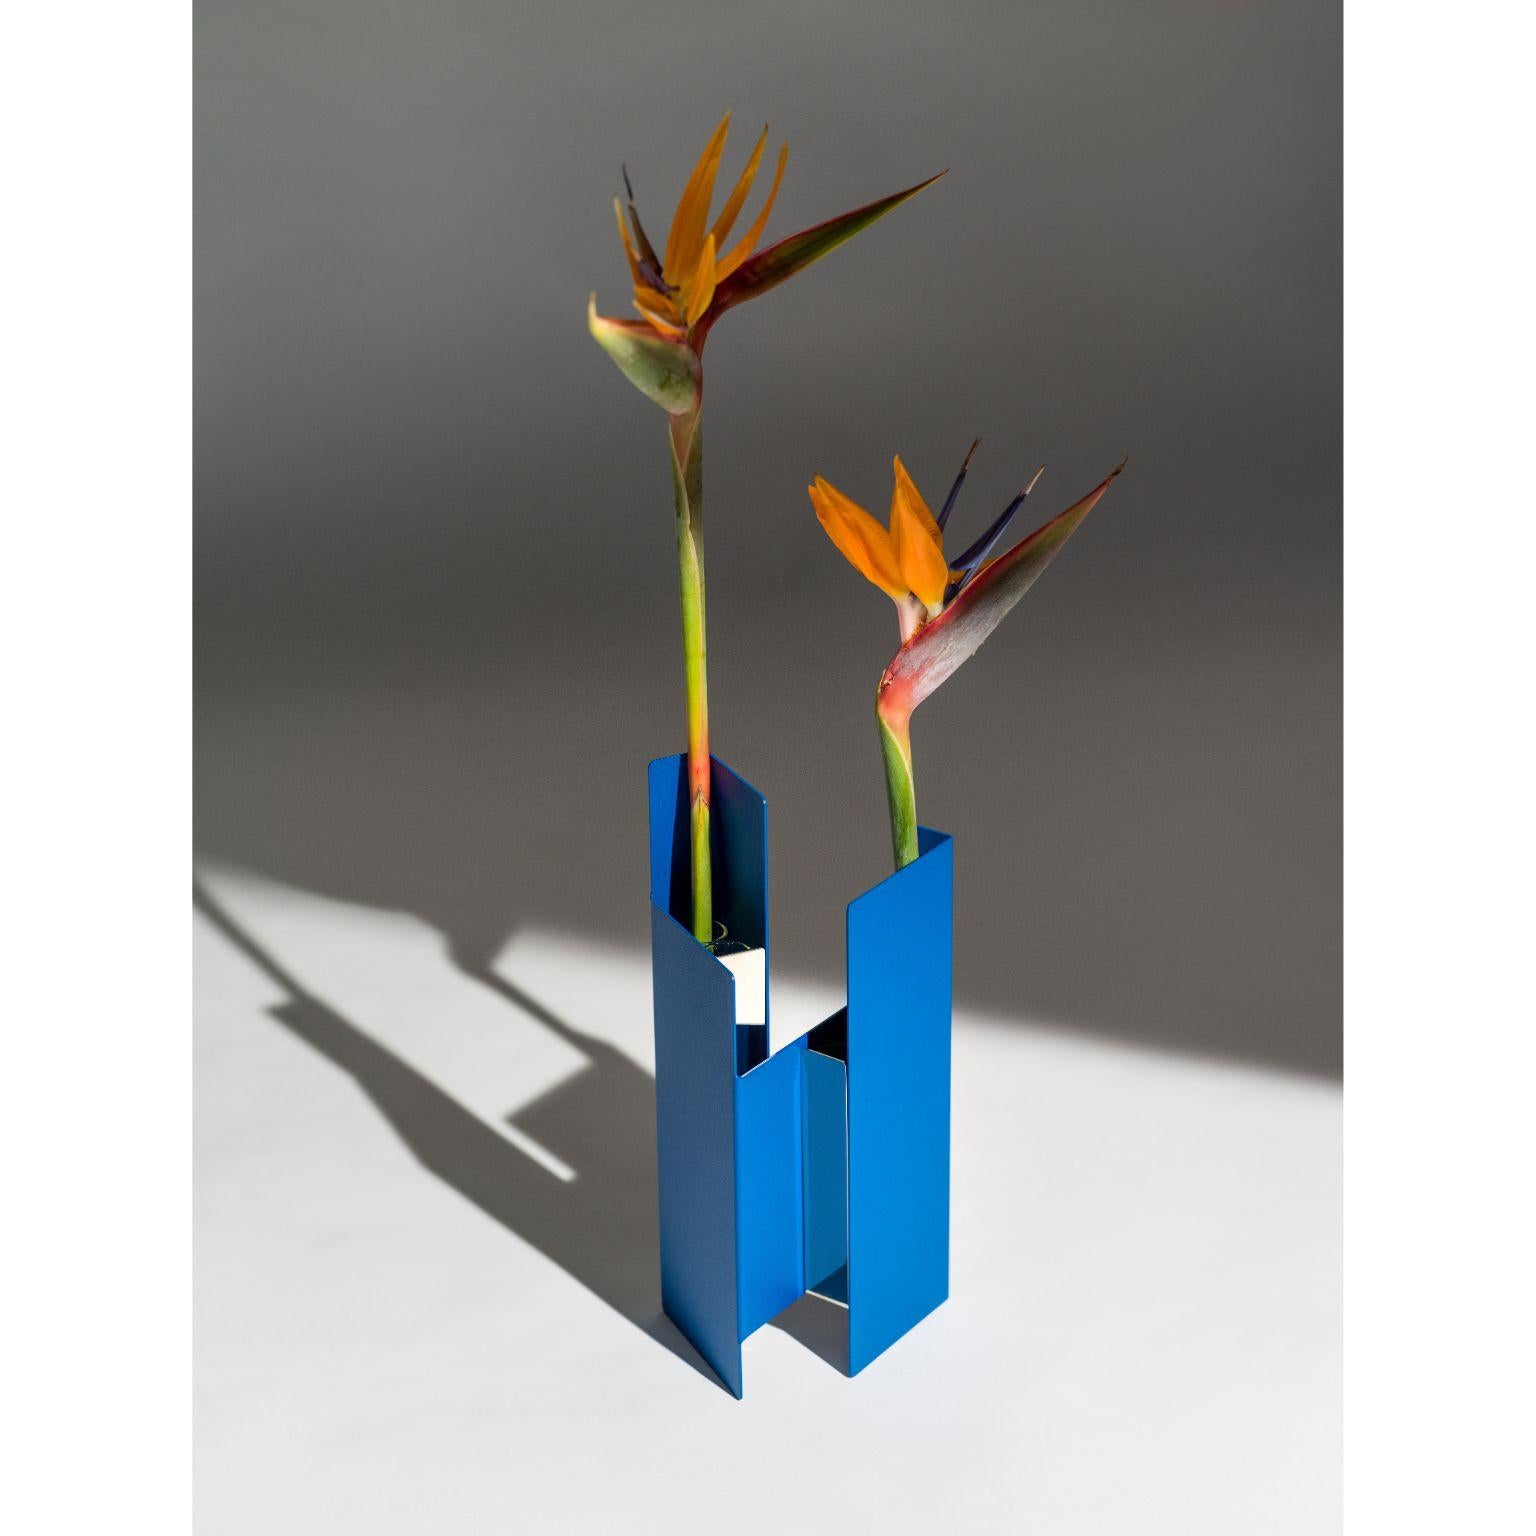 Blue Fugit vase by Mason Editions
Design: Matteo Fiorini
Dimensions: 12 × 15 × 34 cm
Materials: Iron and Pirex glass

Fugit vase consists of a metal sheet that seems to turn and close around itself, generating an alternation of fullness and